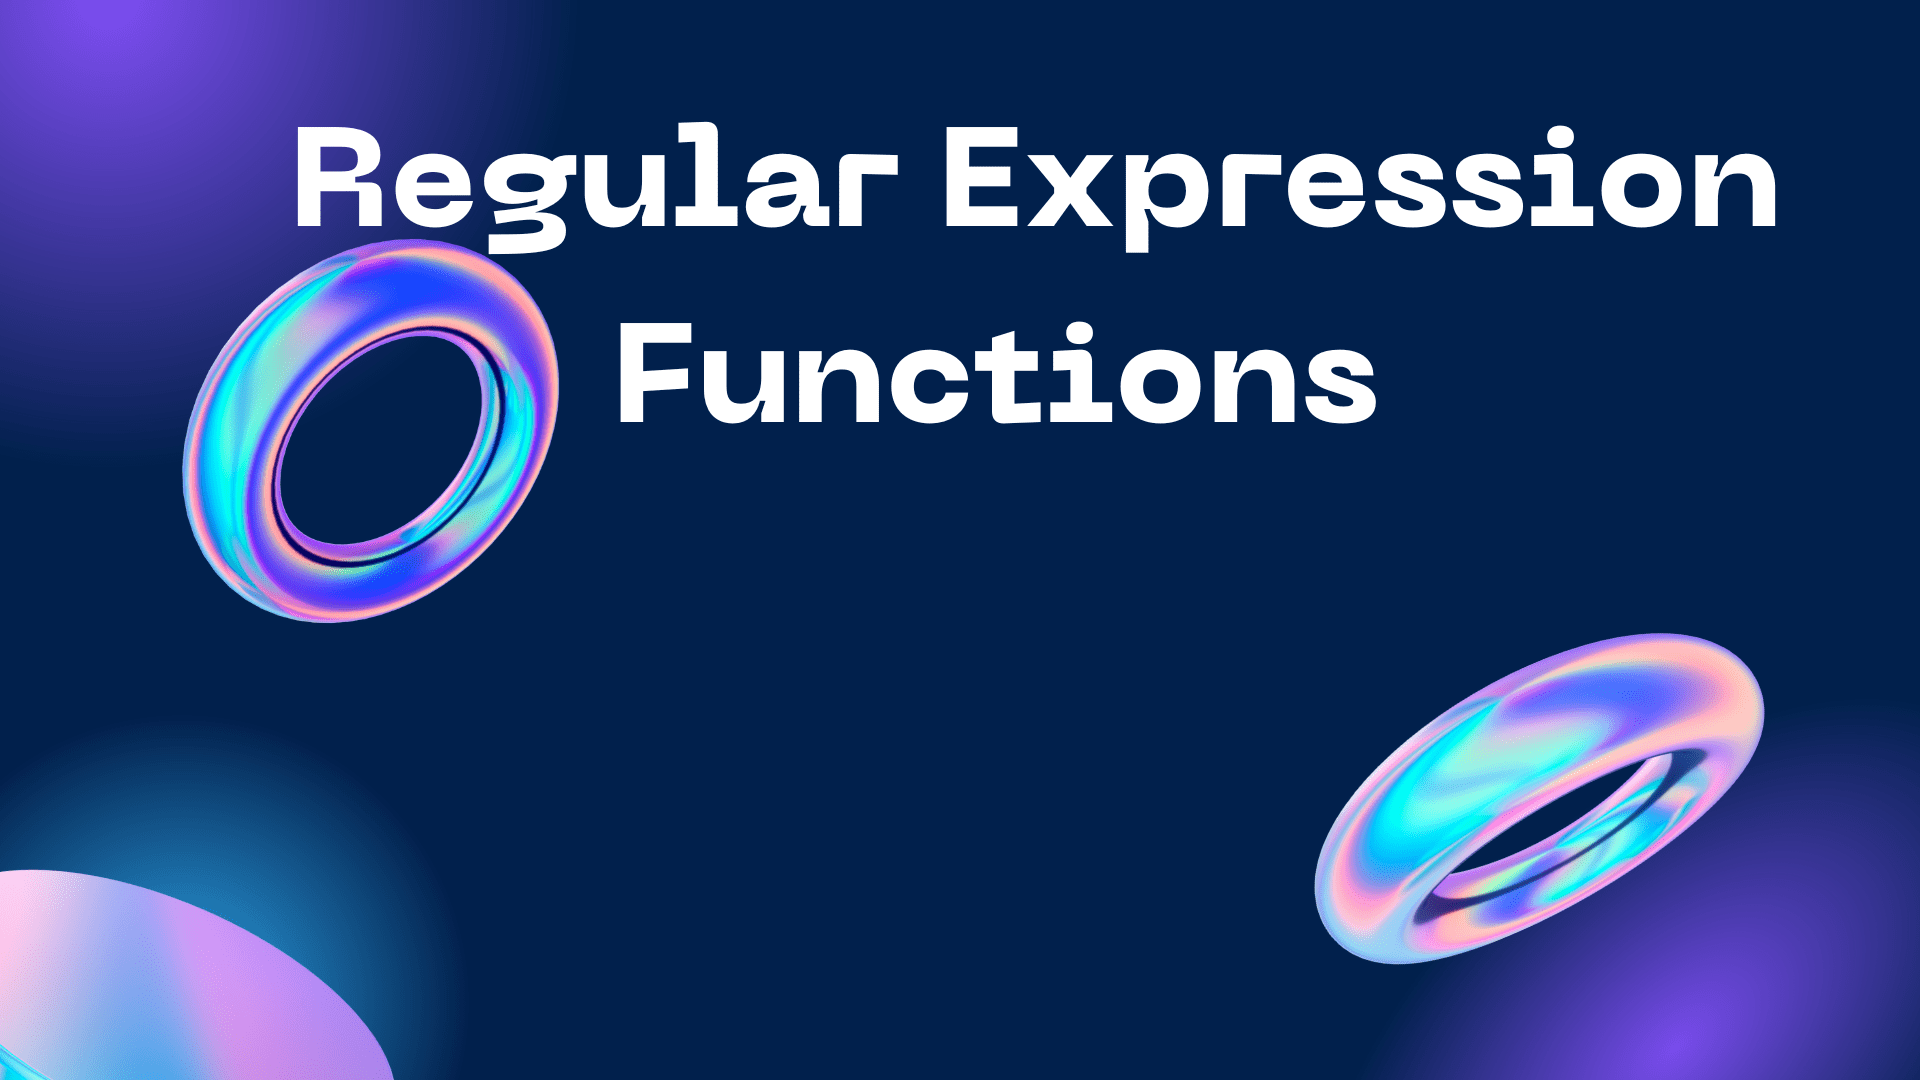 Regular Expression Functions